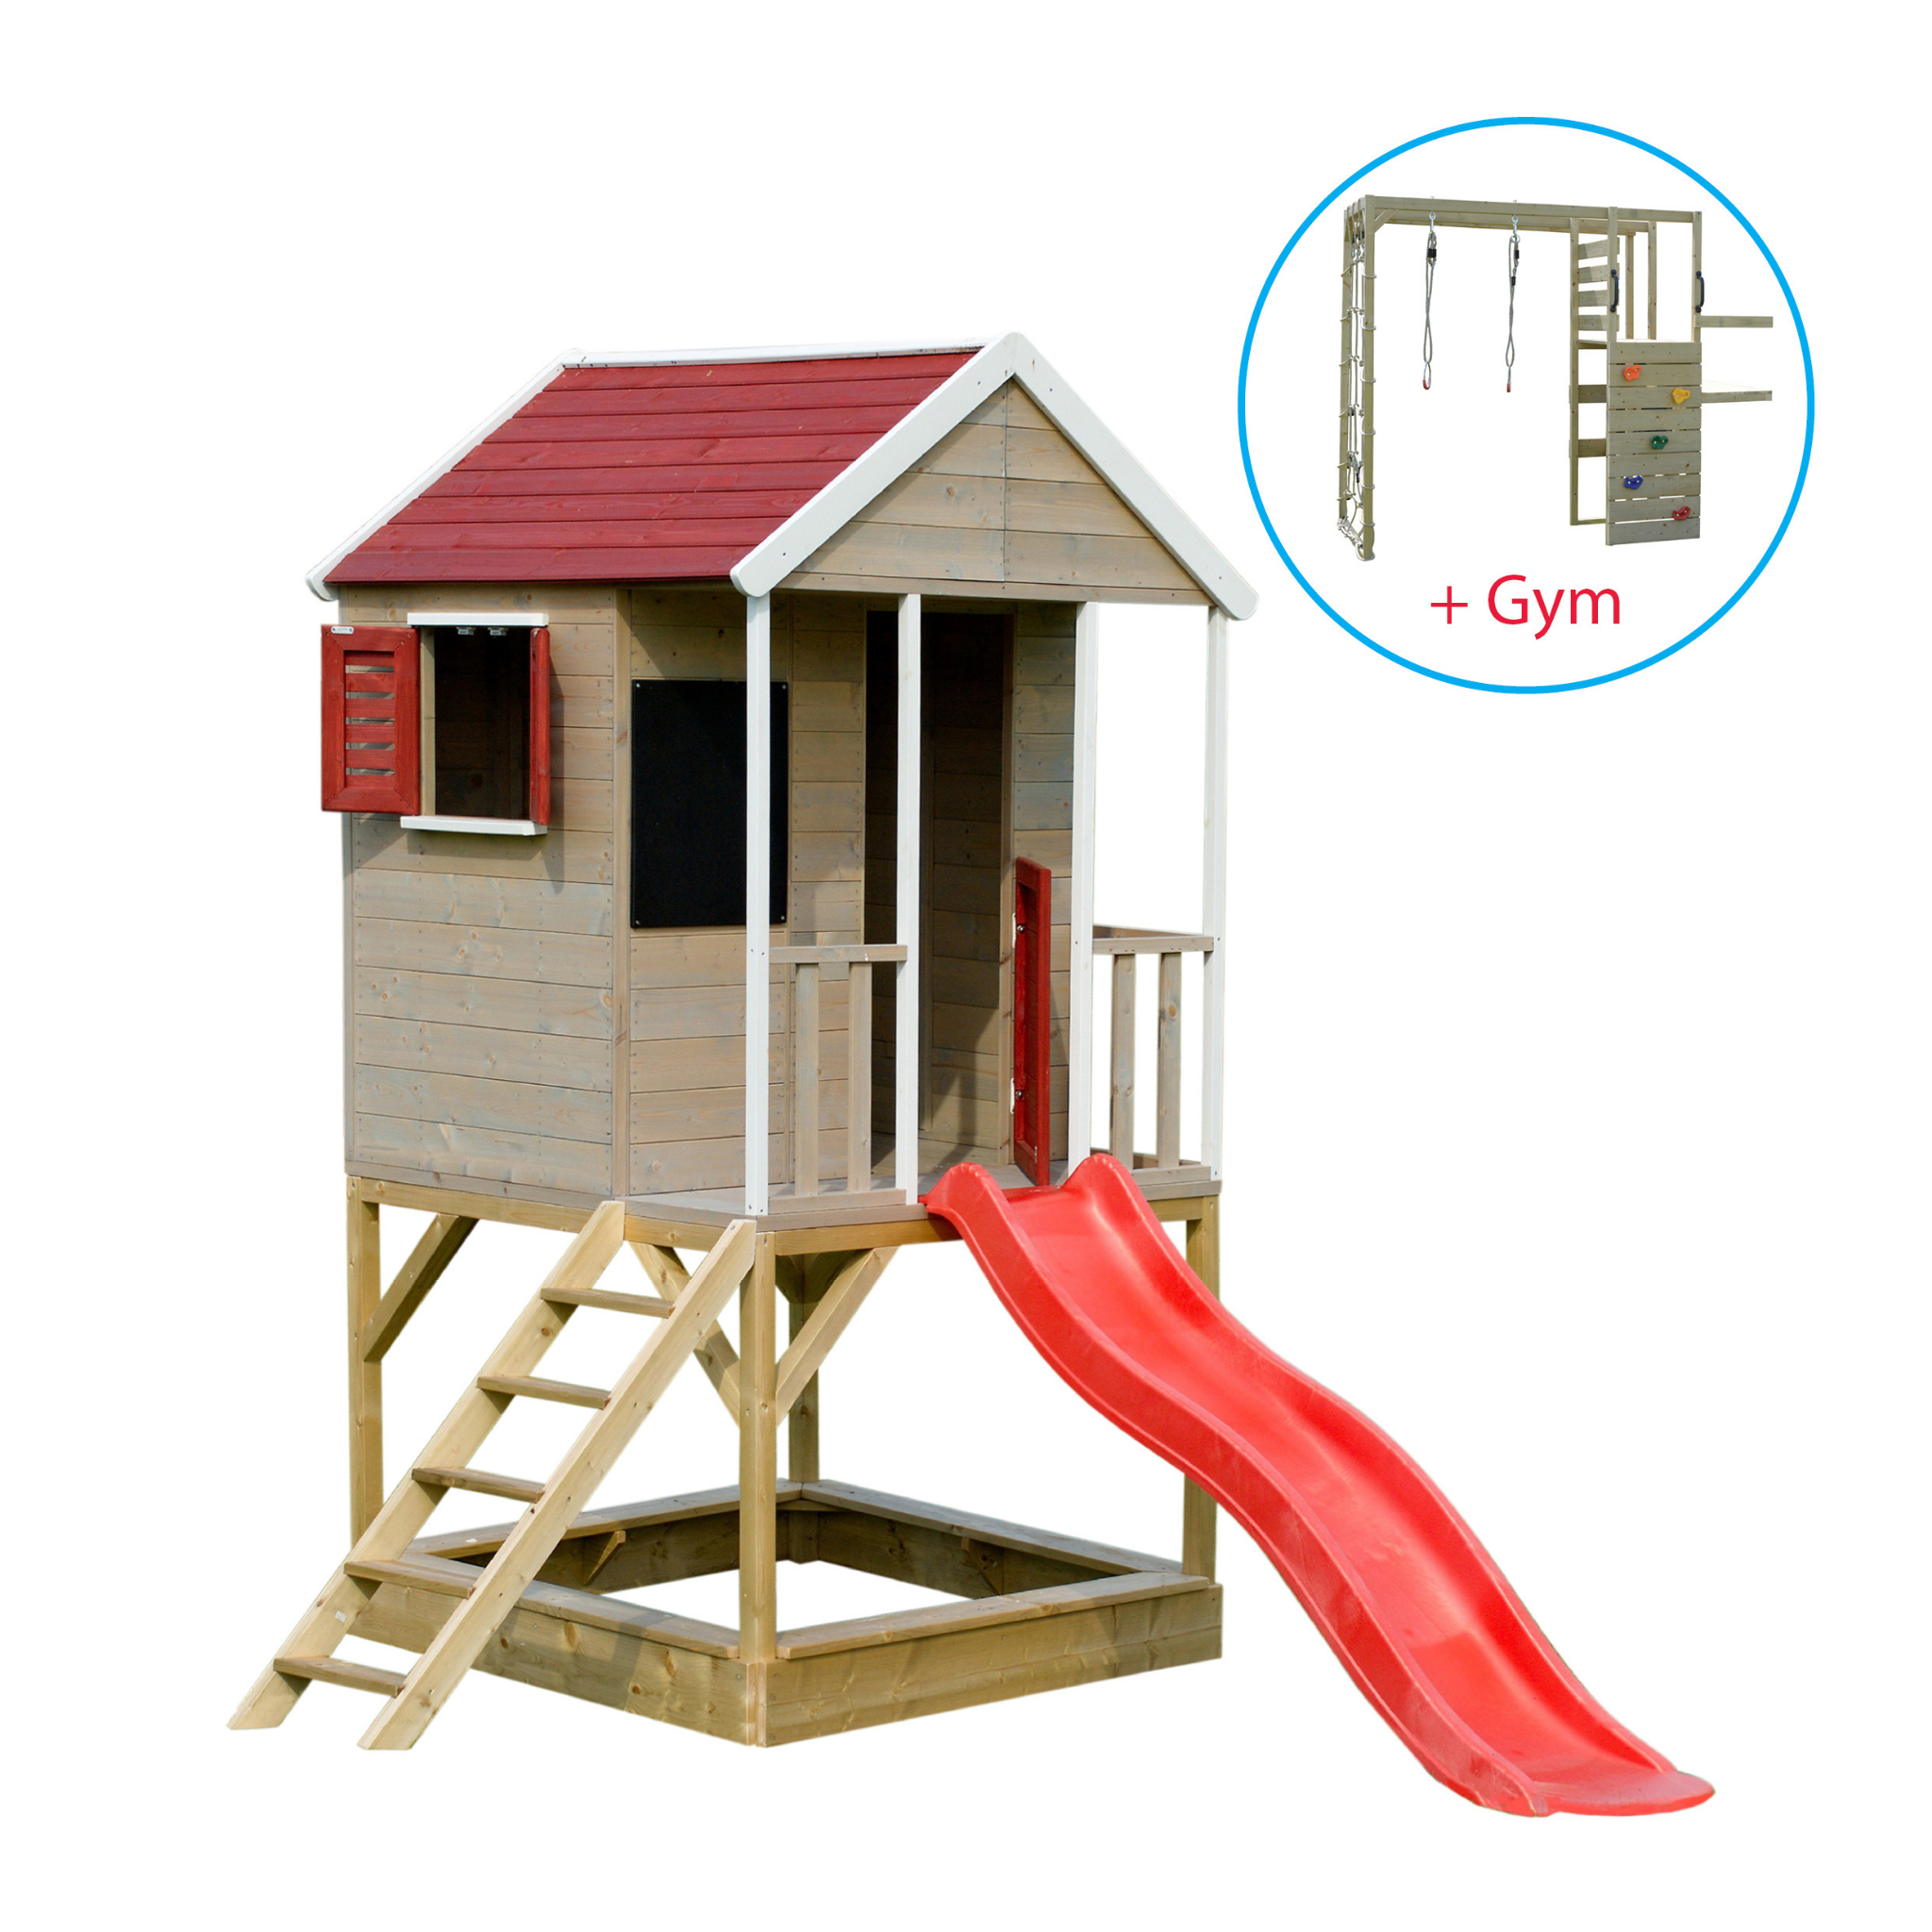 M7R-G Summer Adventure House with Platform and Slide + Gym Attachment